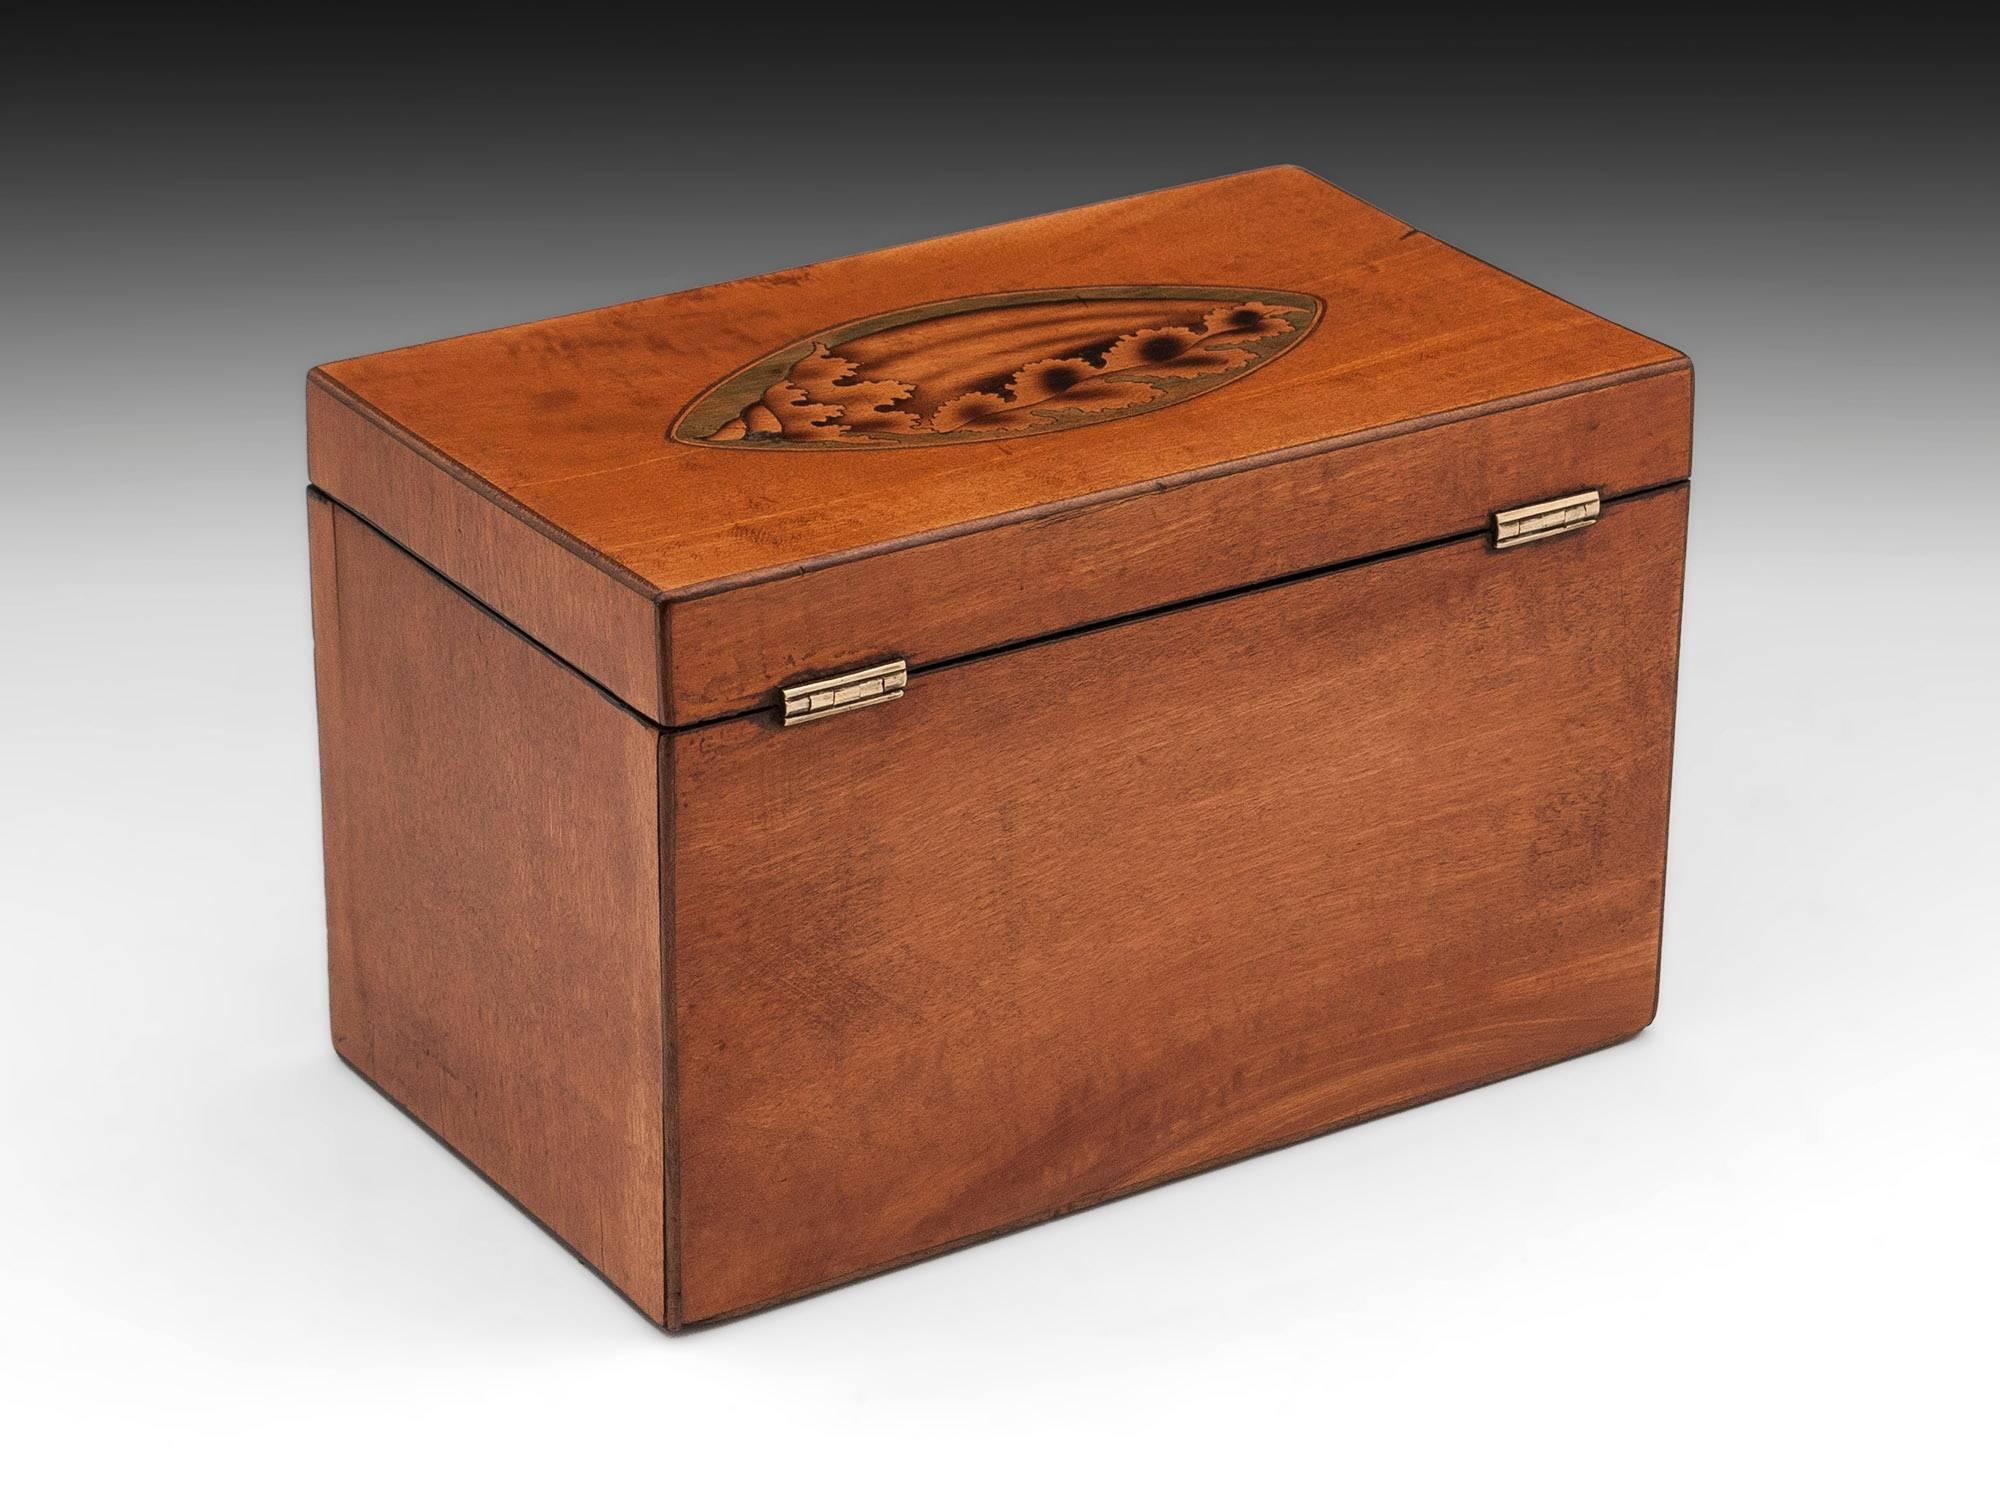 British Satinwood Antique Tea Caddy with Inlaid Conch Shells, 18th Century